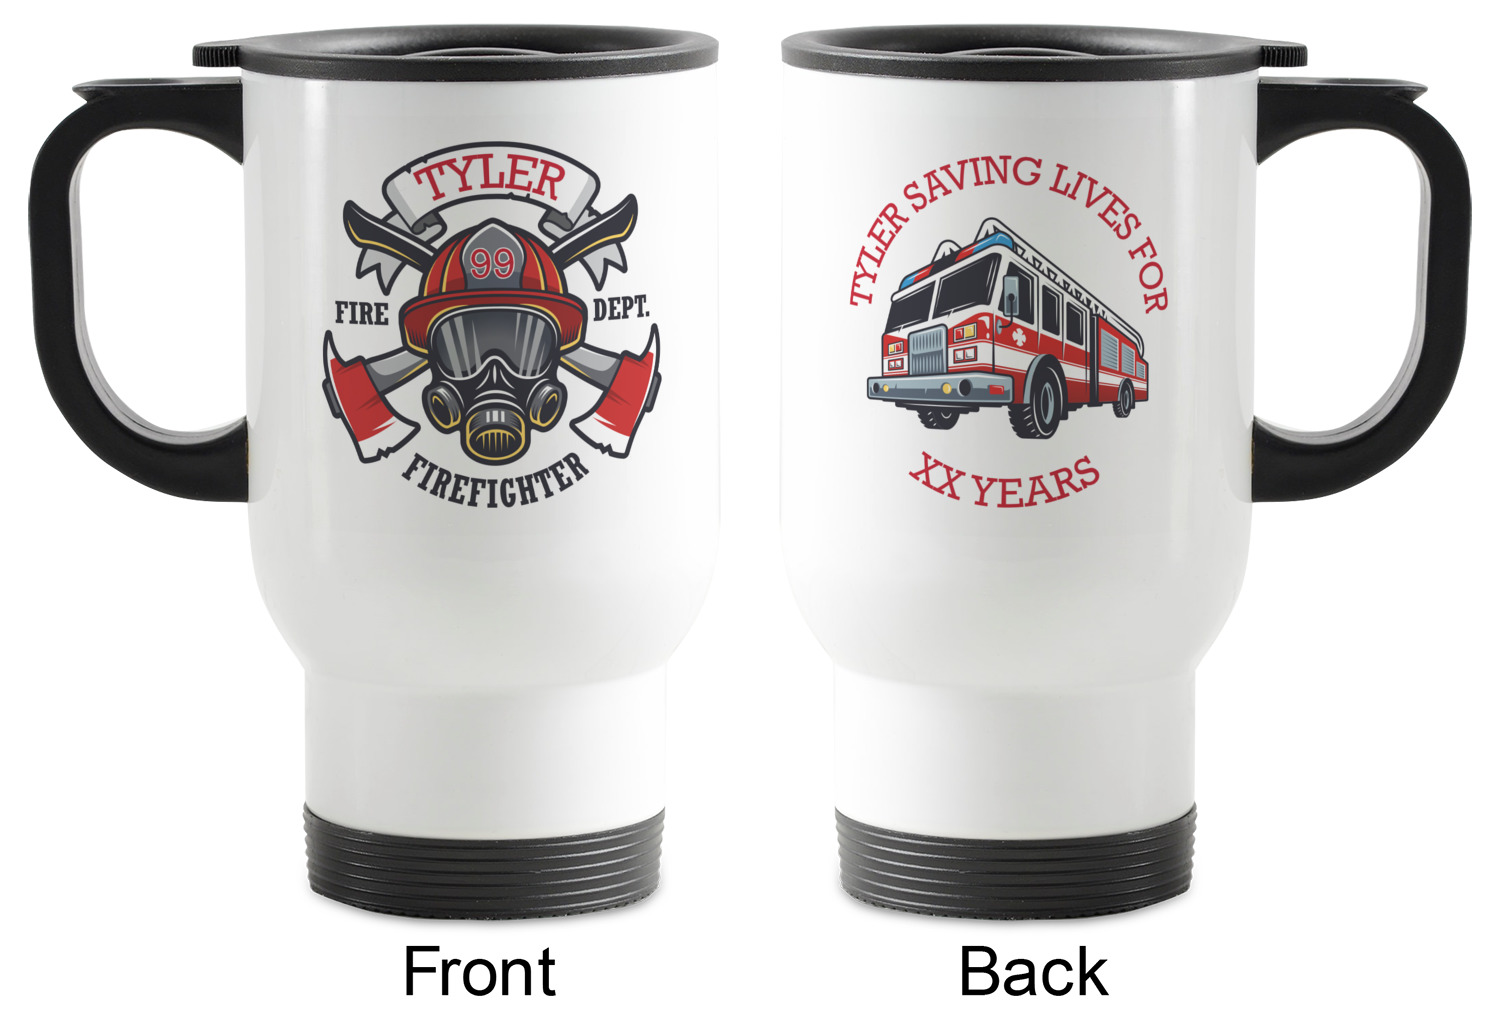 https://www.youcustomizeit.com/common/MAKE/1960007/Firefighter-Career-Stainless-Steel-Travel-Mug-with-Handle-Apvl.jpg?lm=1670592579